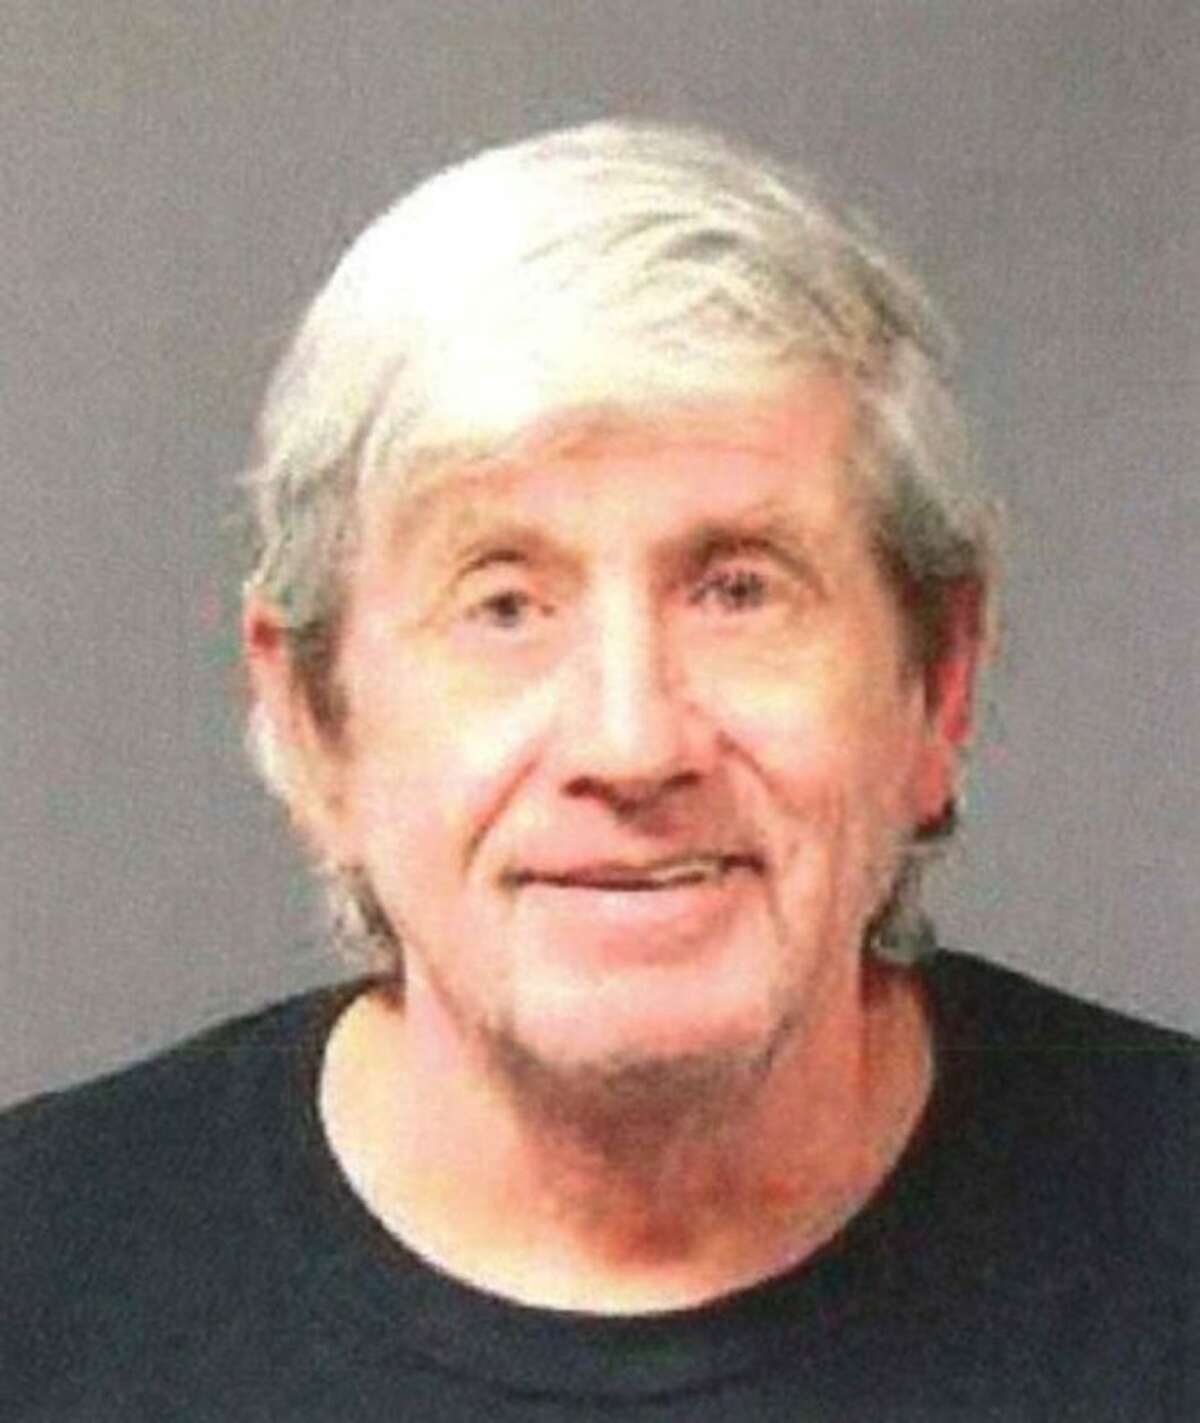 Robert Robbins, 68, of Colchester, was charged with first-degree manslaughter Monday in connection with the stabbing death of Travis Terry, 39, of Bolton, in October, according to state police.